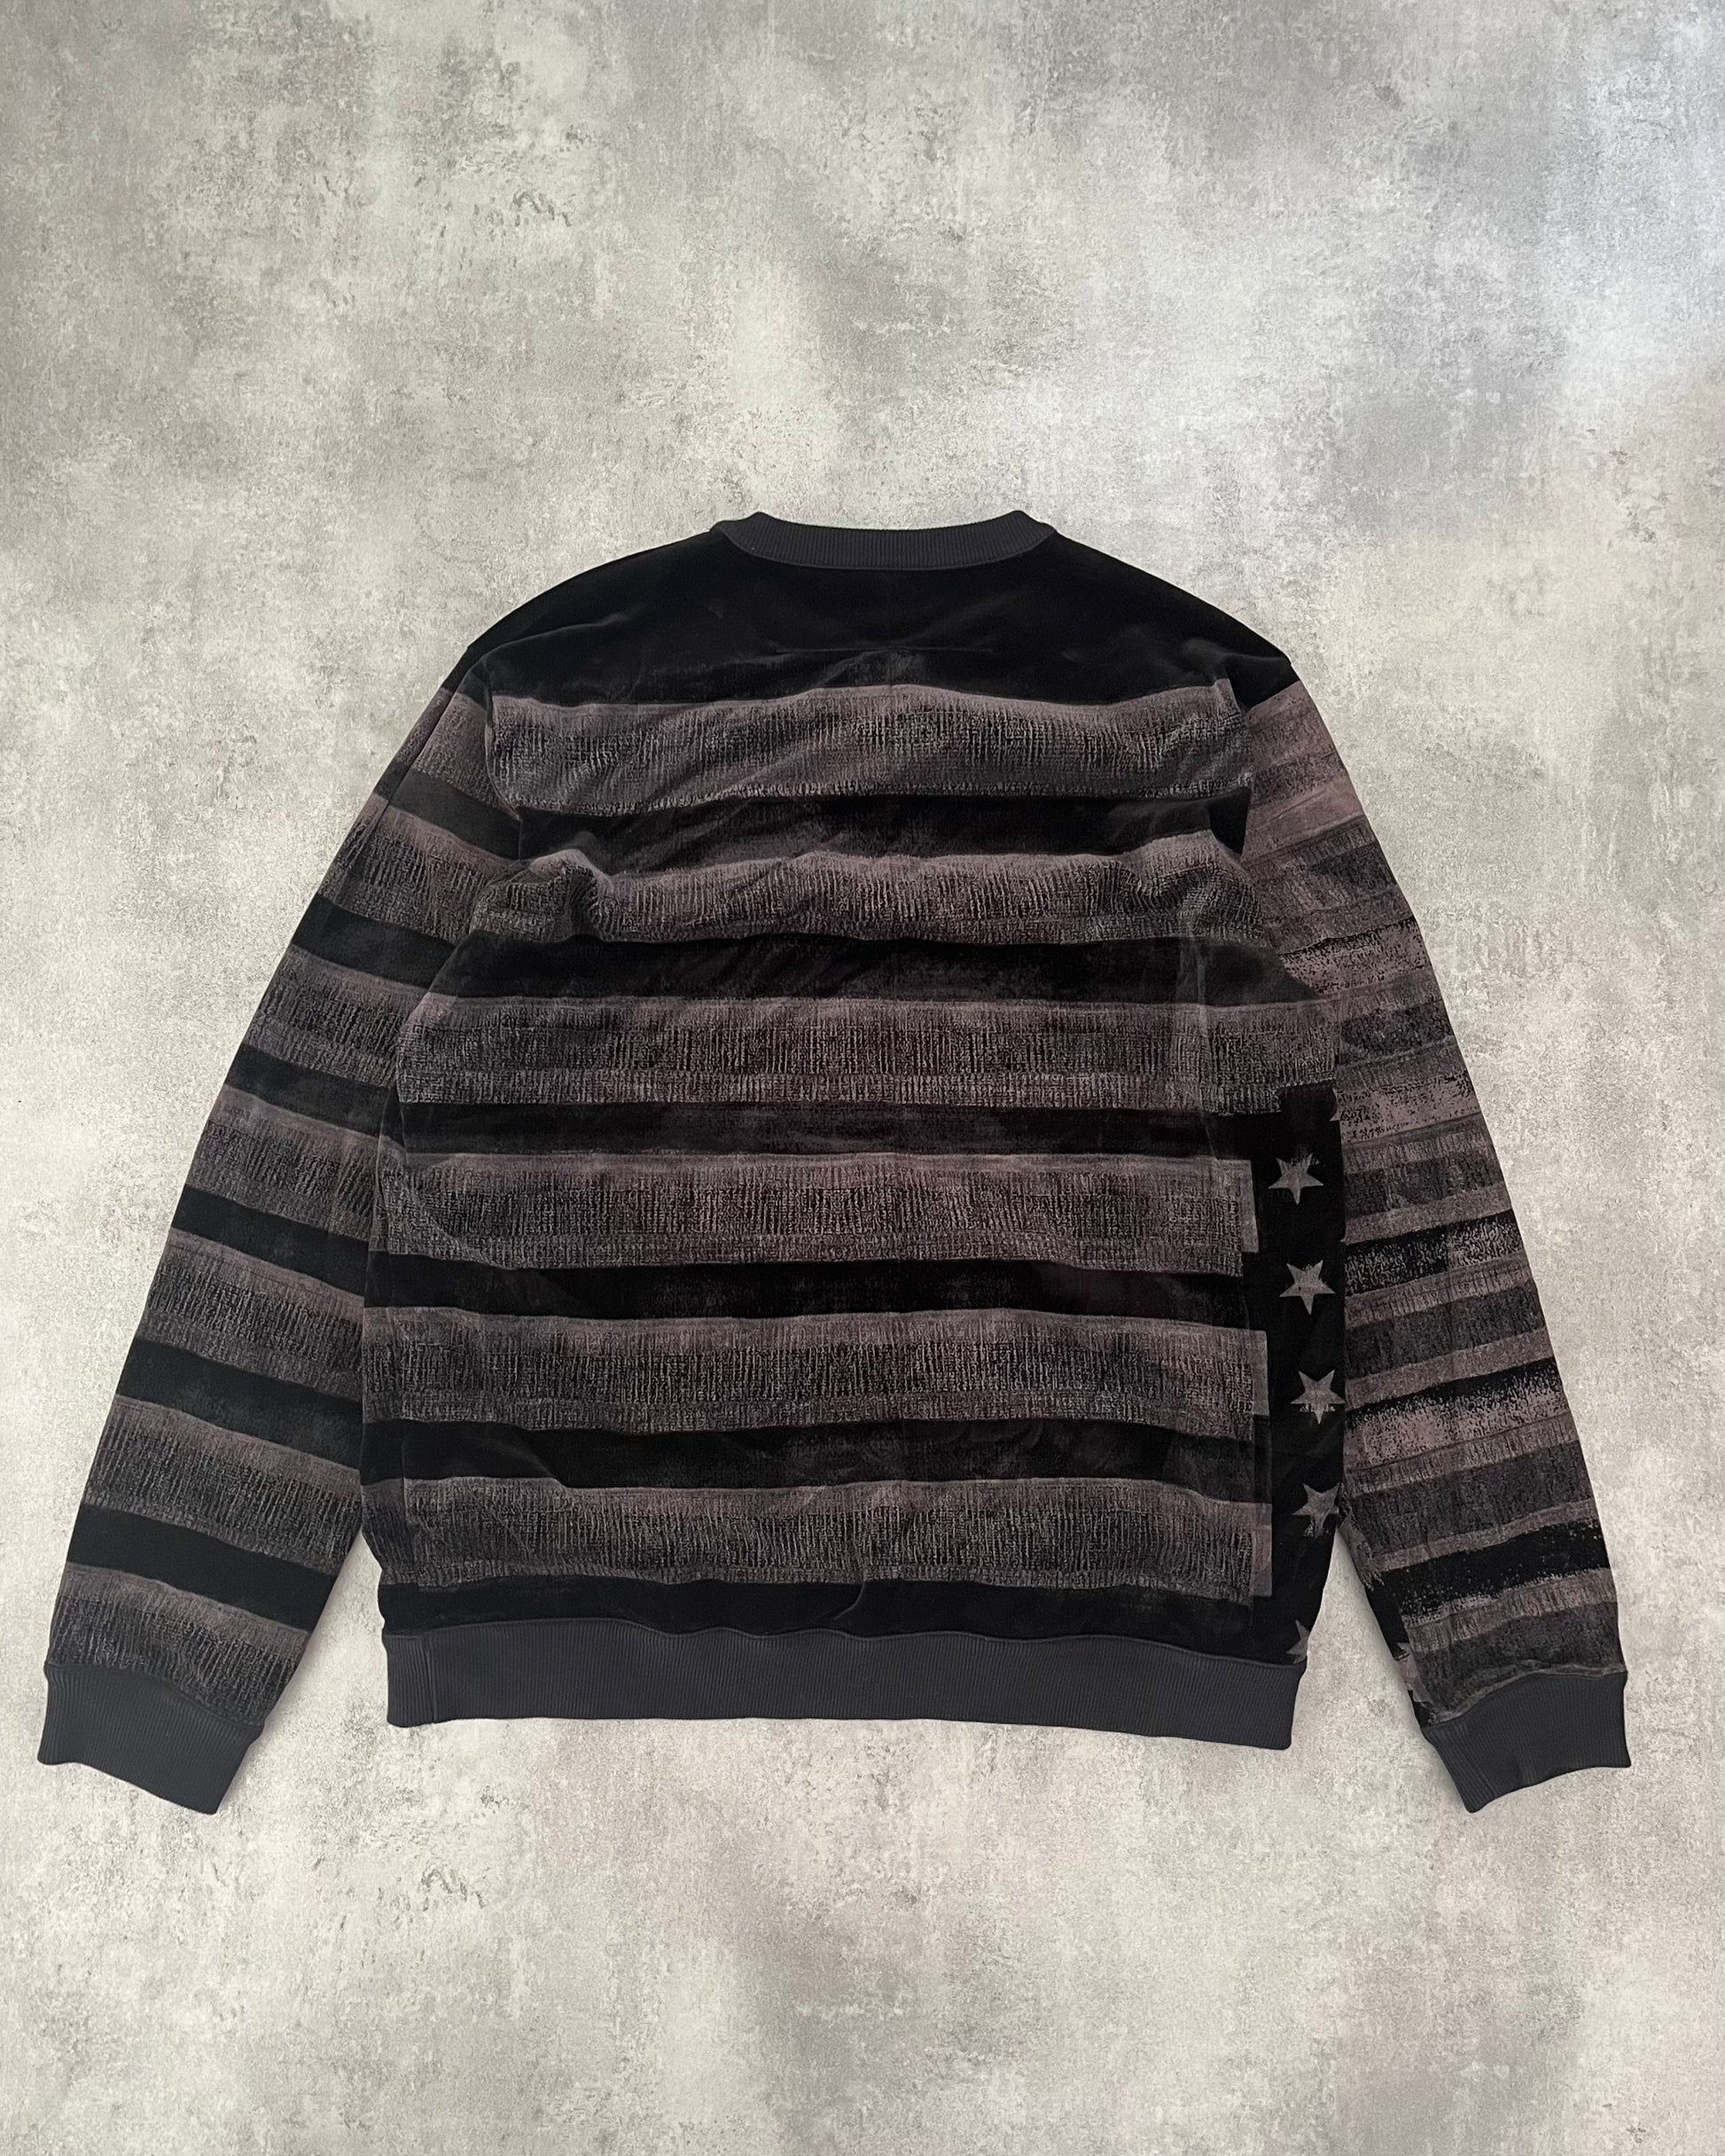 FW2013 Givenchy Shadow Flag Sweater (L) - 2